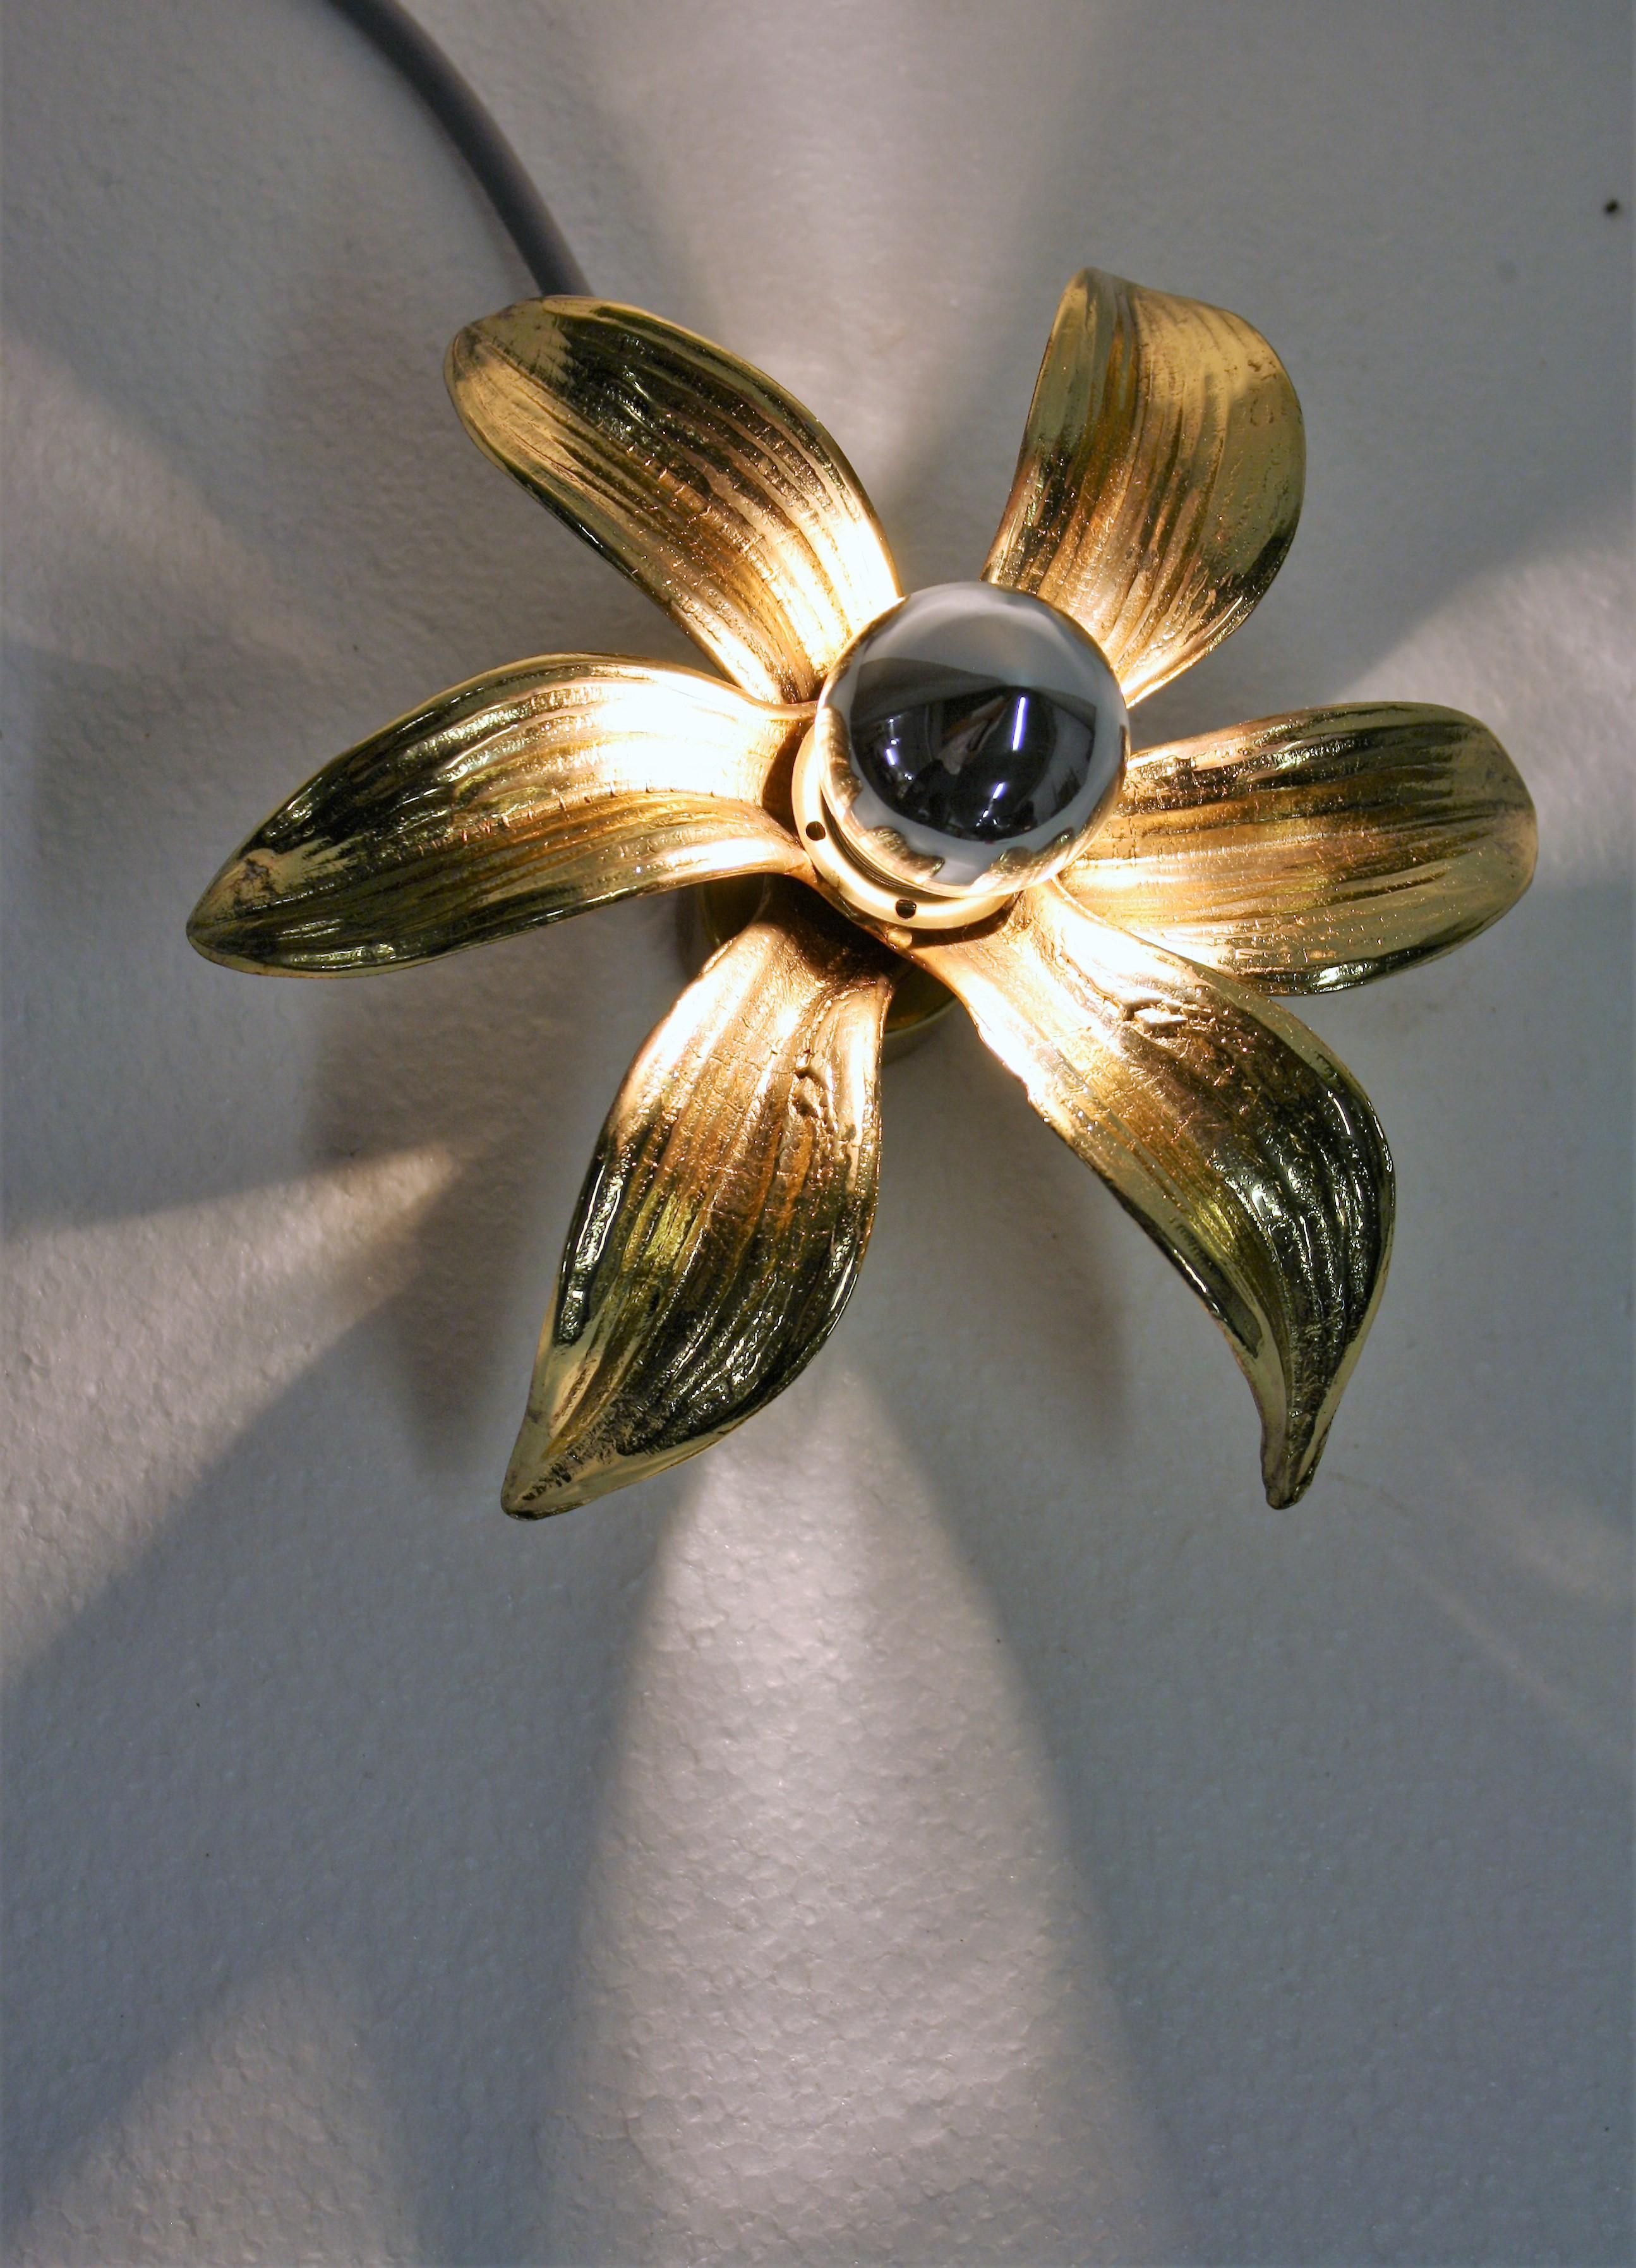 Brass flowers ceiling or wall light in the style of designer Willy Daro manufactured by 'Massive Lighting', circa 1970s, Belgian.

Thoroughly cleaned respecting the vintage patina

Made of 6 quality cast naturalistic textured leaves. 

The